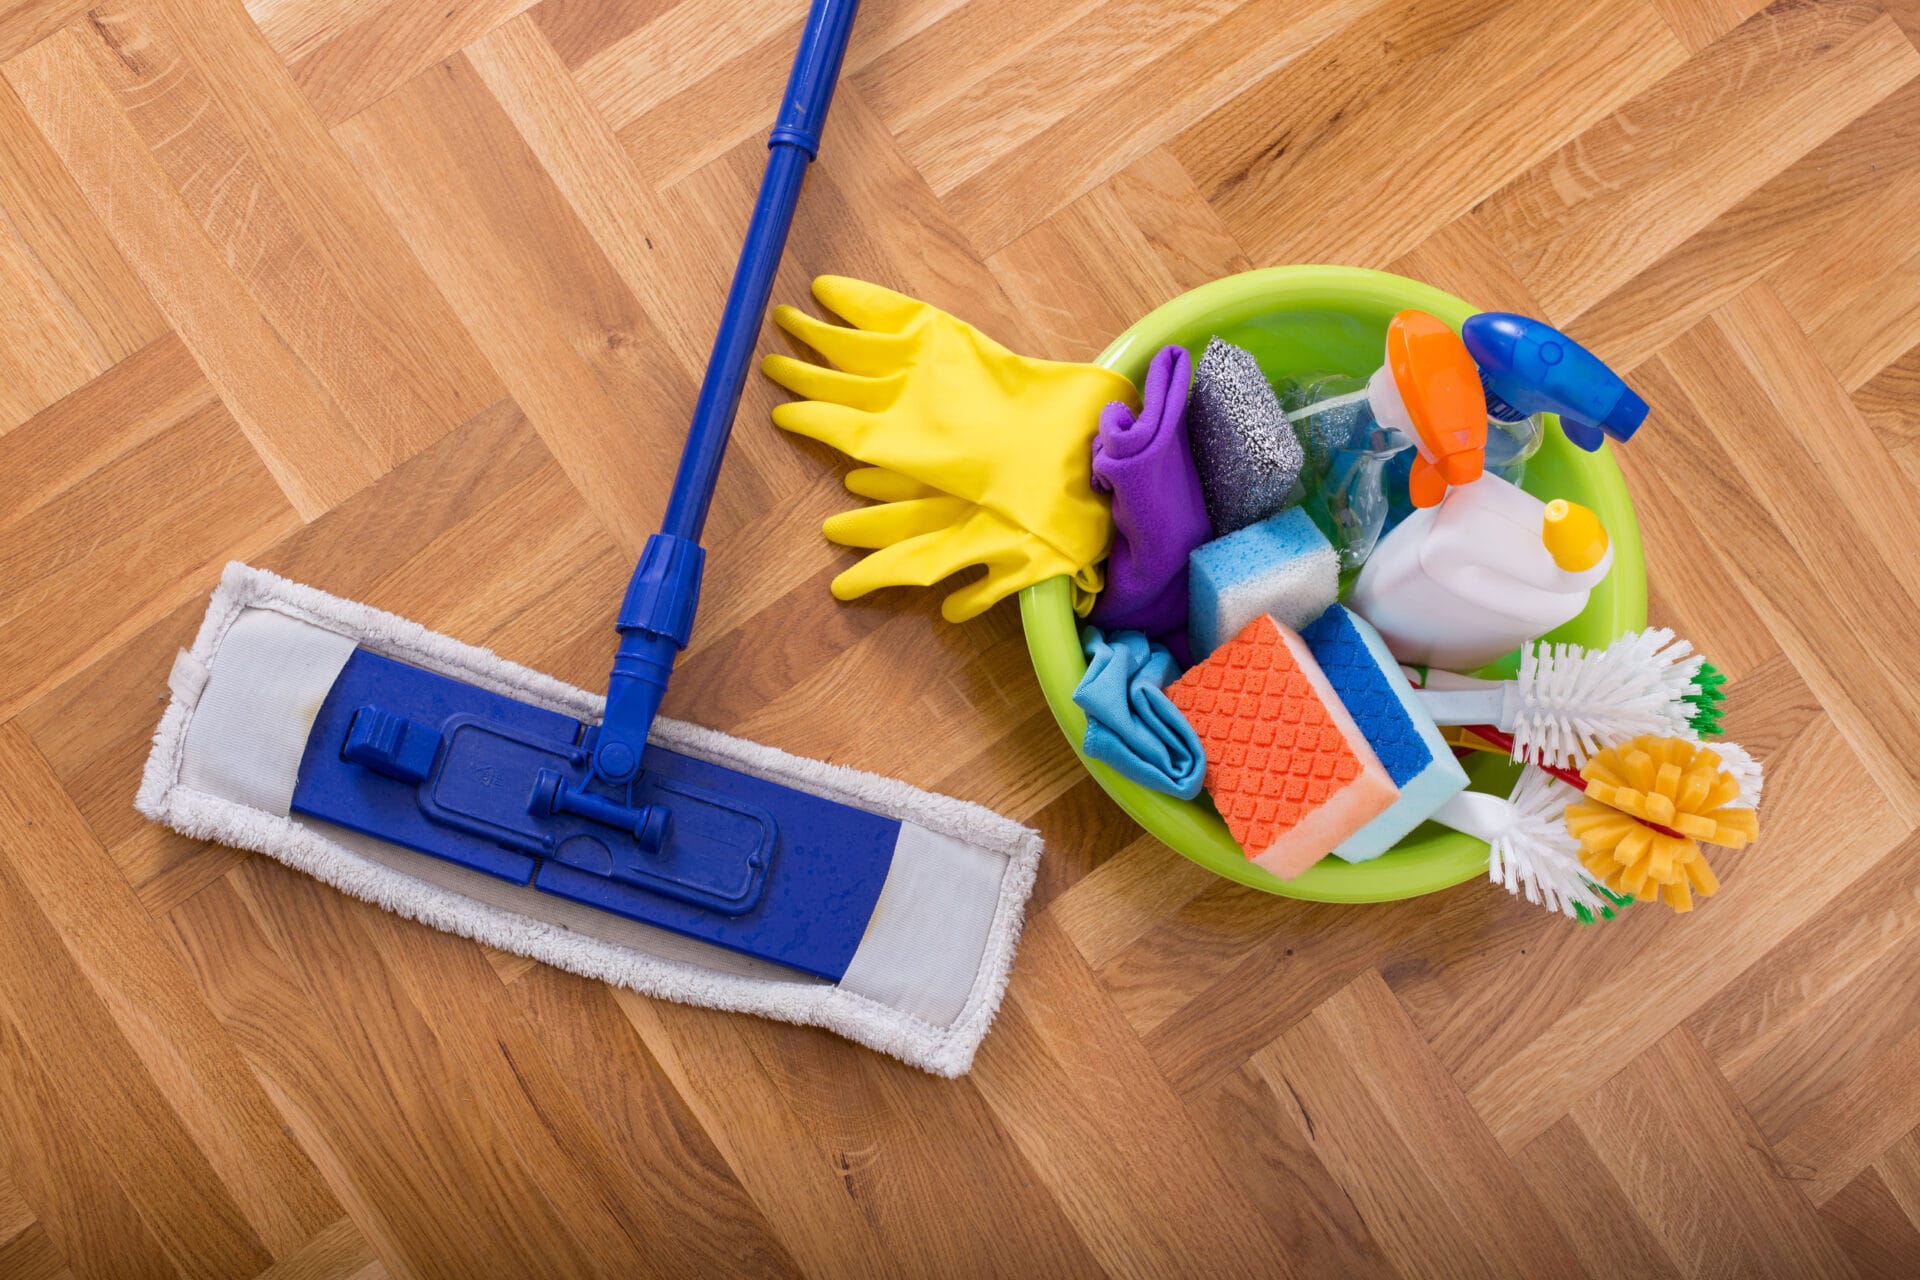 Cleaning supplies to help sanitize a home